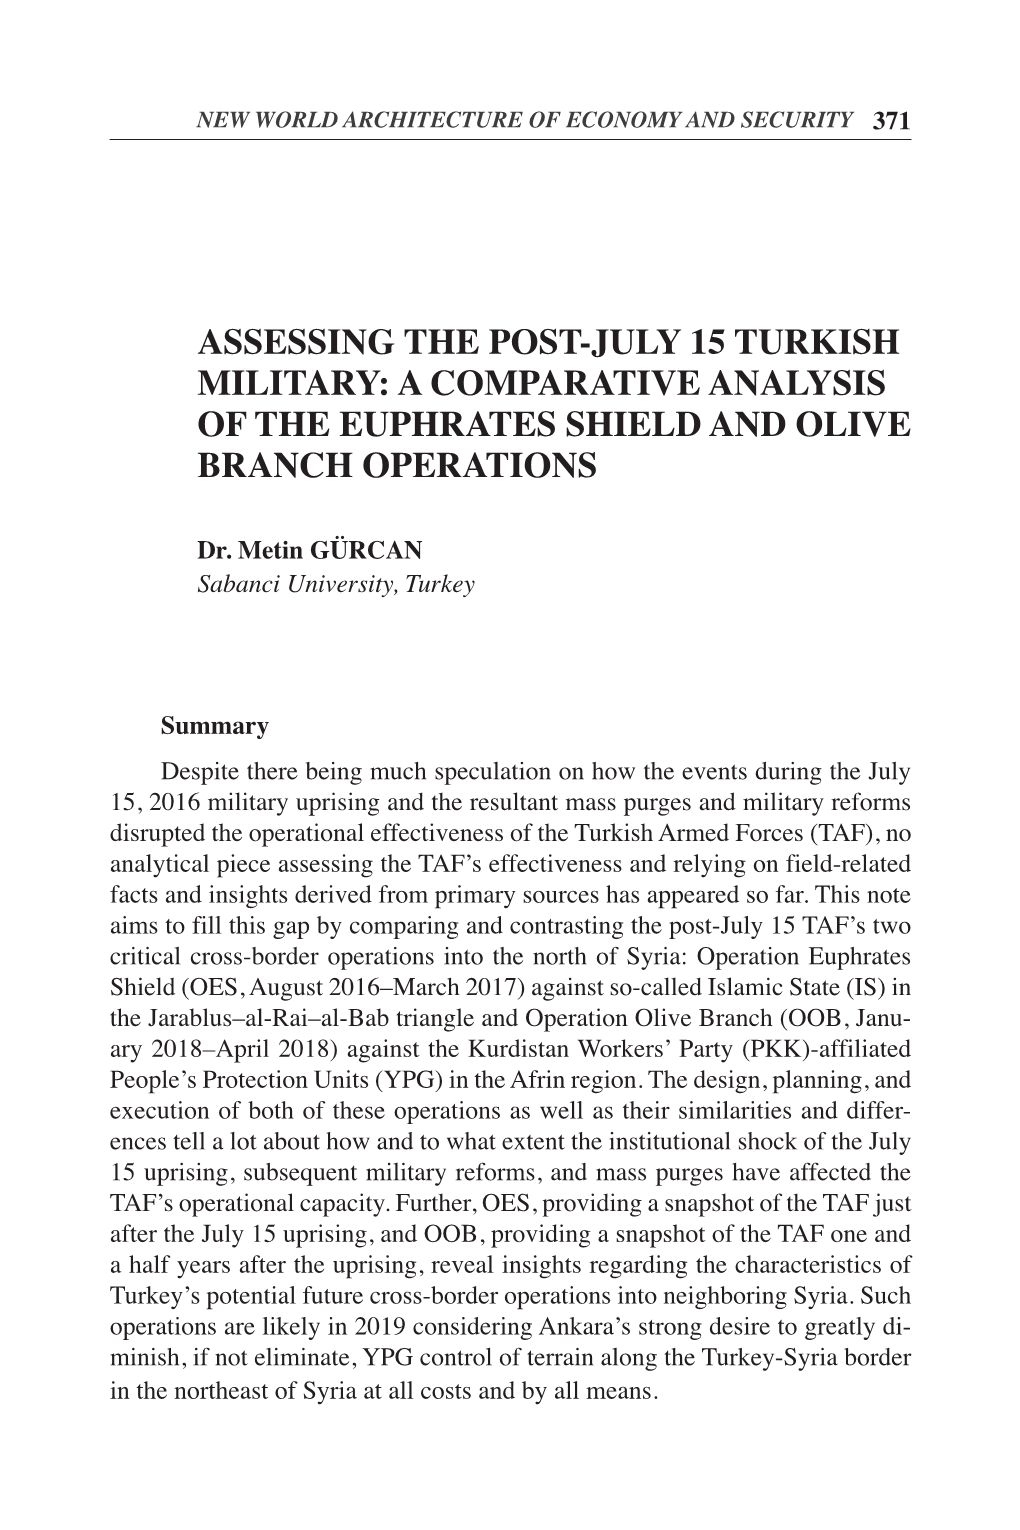 Assessing the Post-July 15 Turkish Military: a Comparative Analysis of the Euphrates Shield and Olive Branch Operations